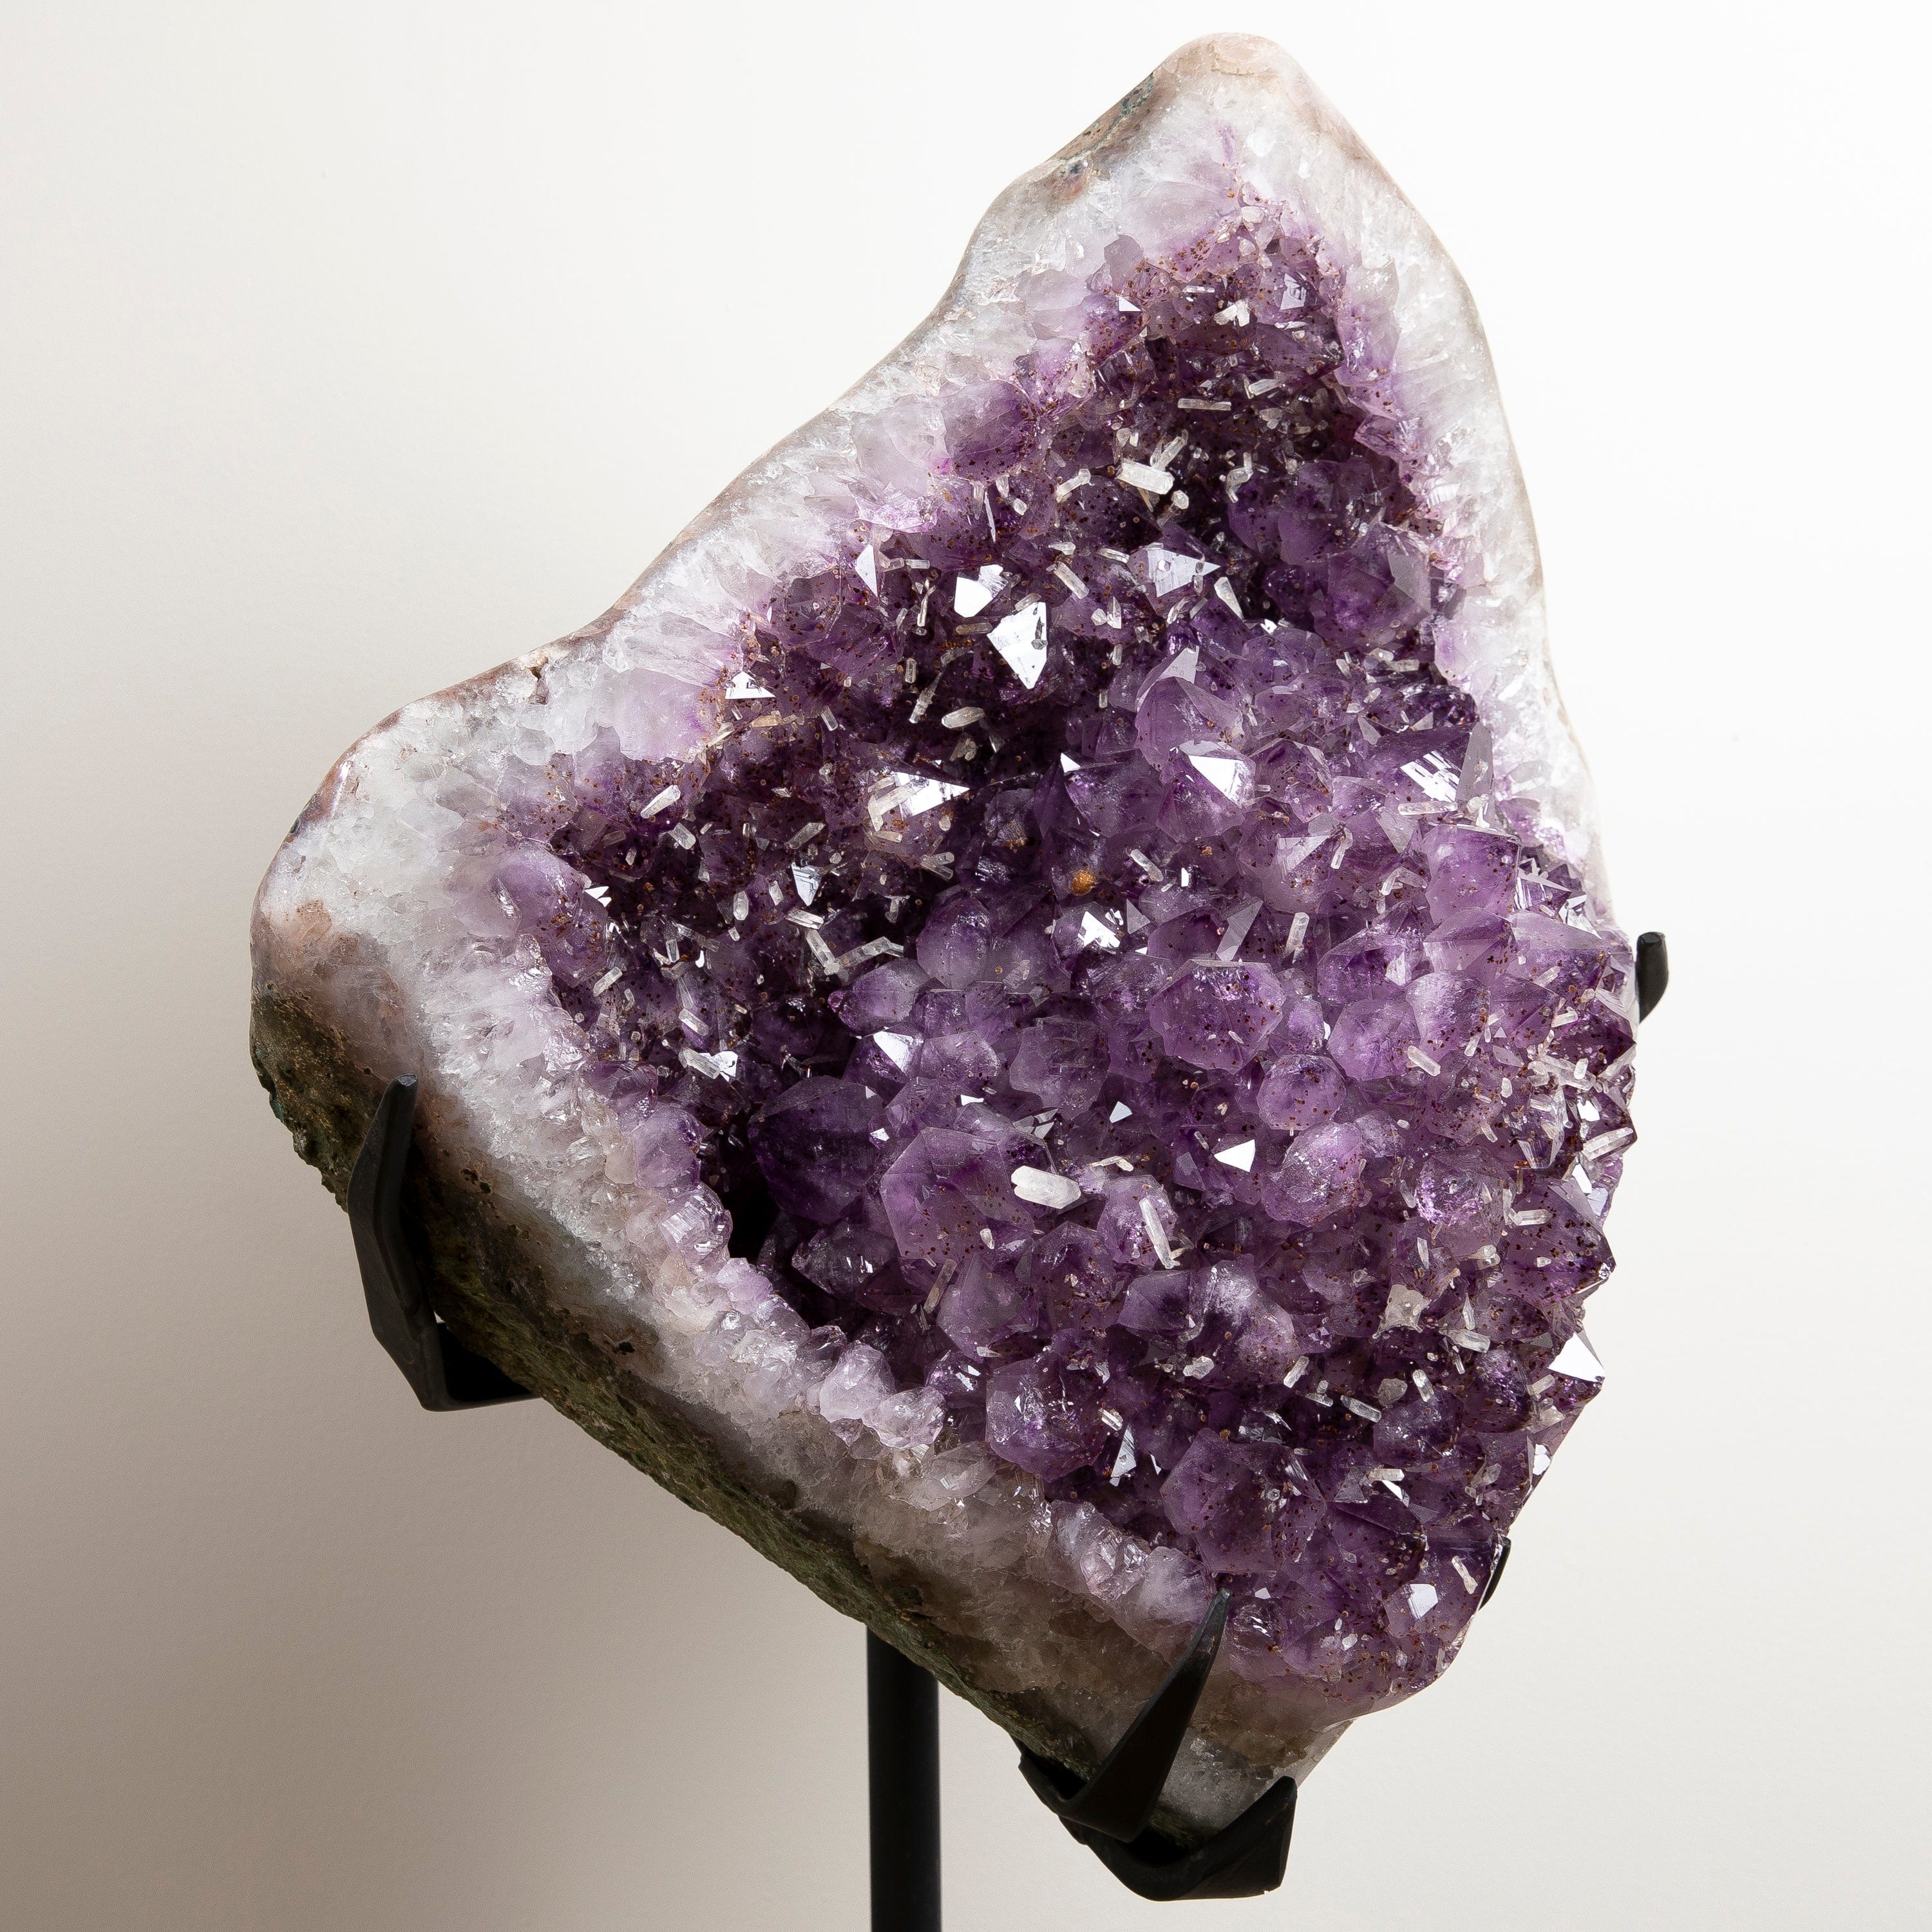 Kalifano Amethyst Amethyst Geode from Brazil on Custom Stand- 42" / 89 lbs BAG7600.003